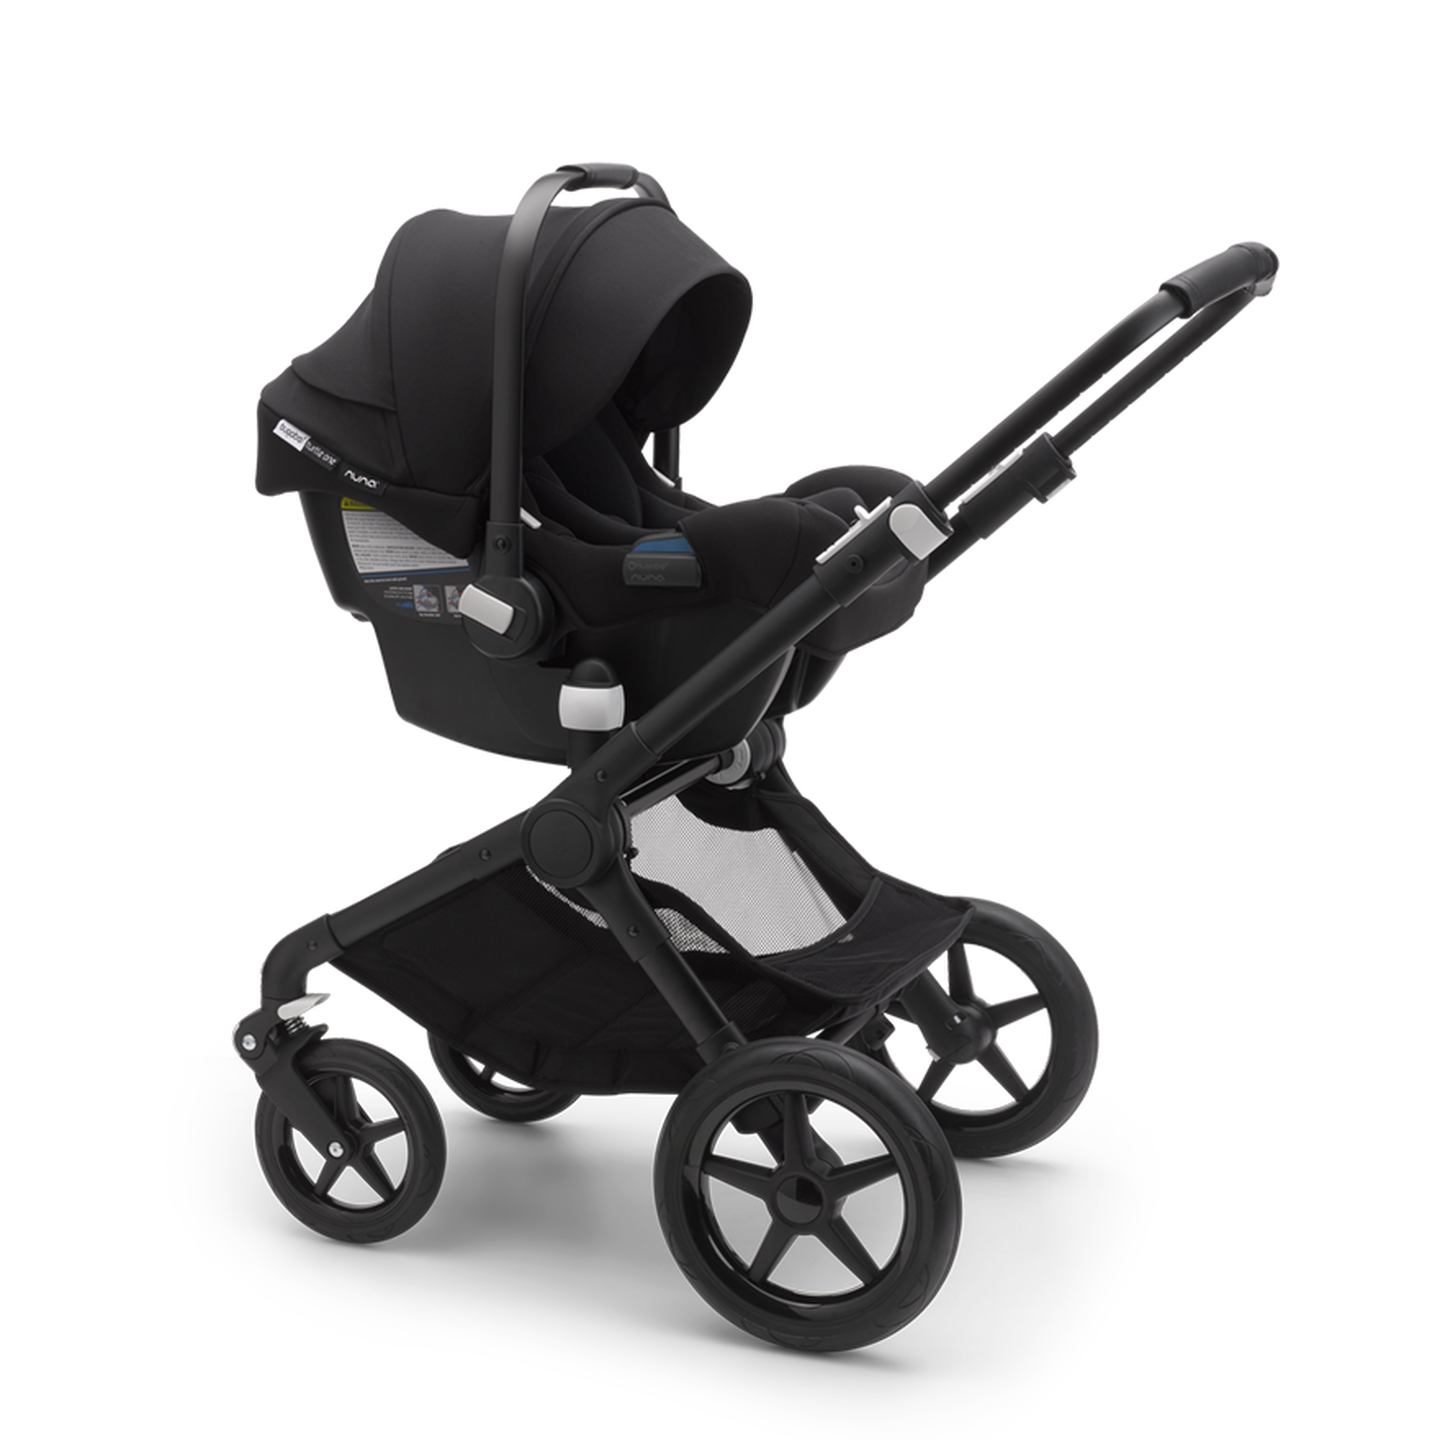 Stroller - Bugaboo Turtle One Infant Car Seat by Nuna with Base, Black -- Available February